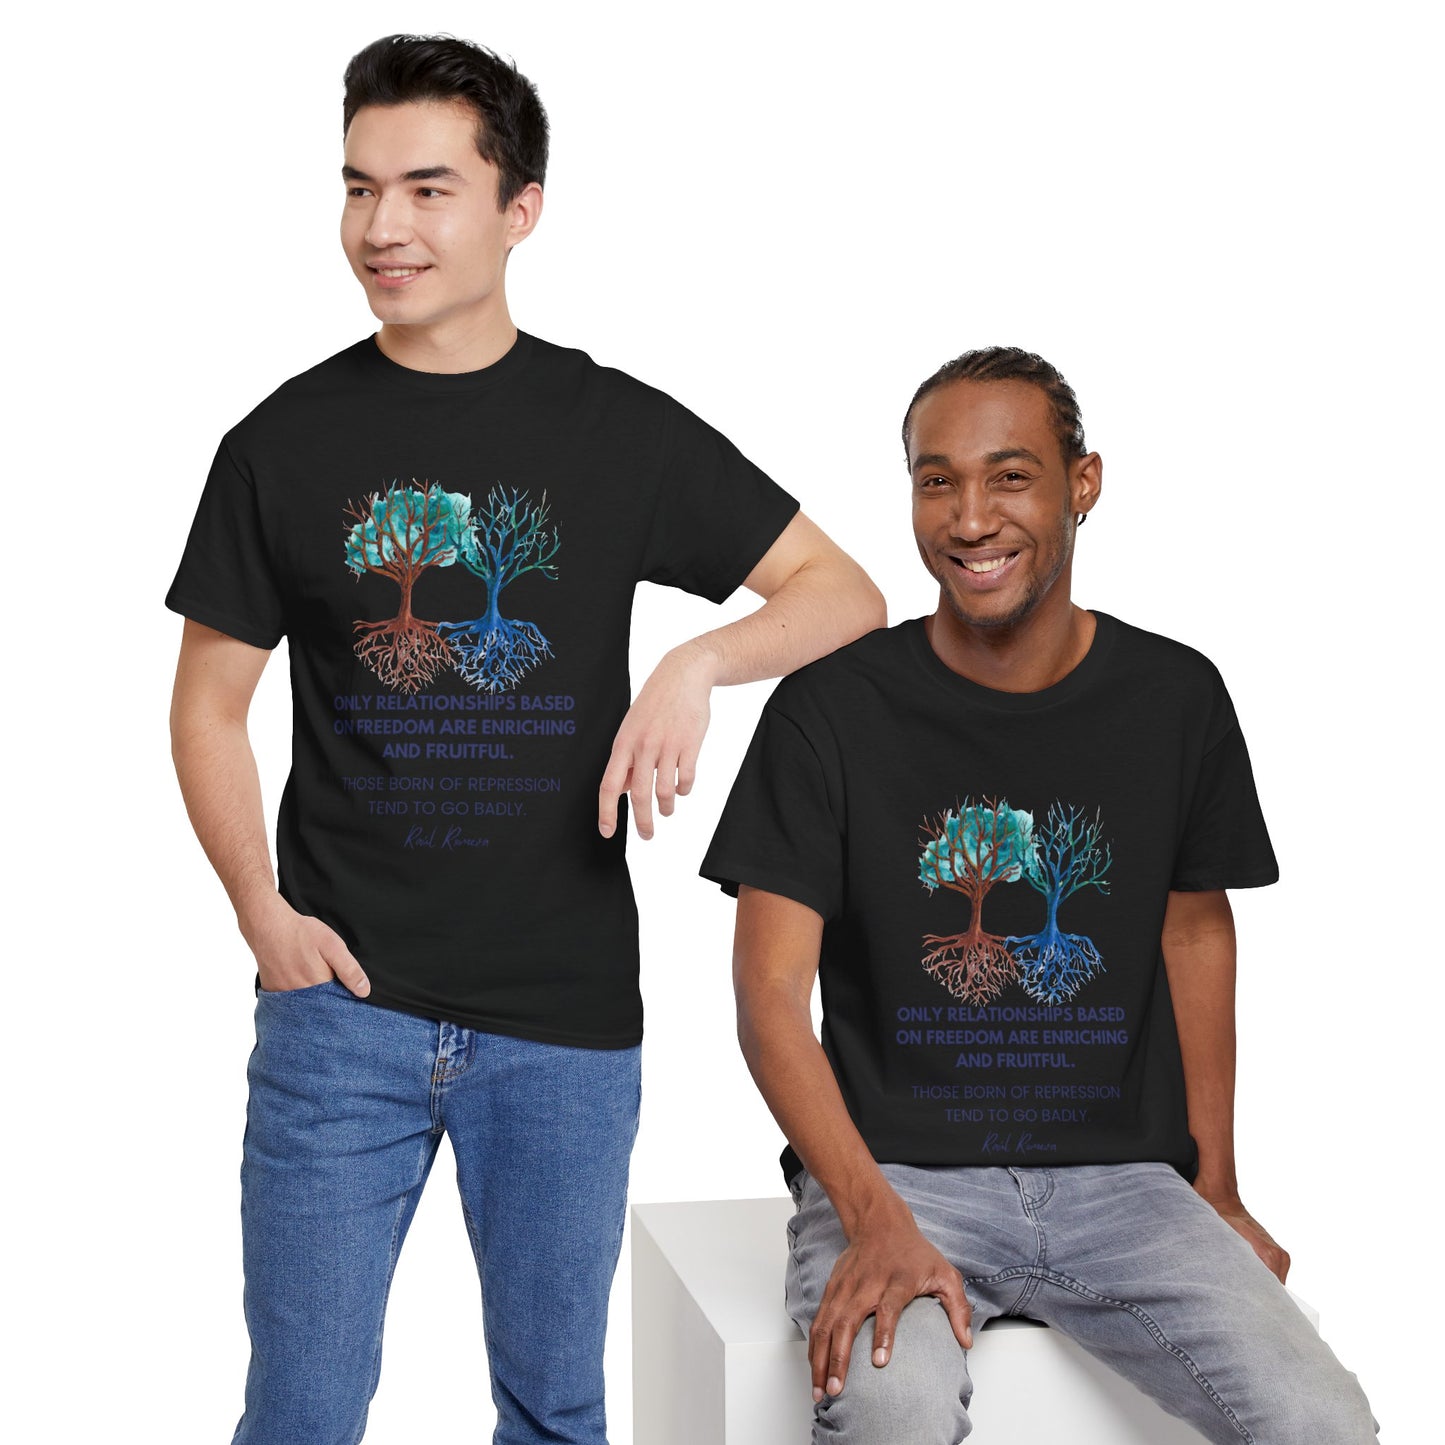 The Free Spirit T-Shirt: Authentic Connections"Freedom... enriching and fruitful" Raul Romeva